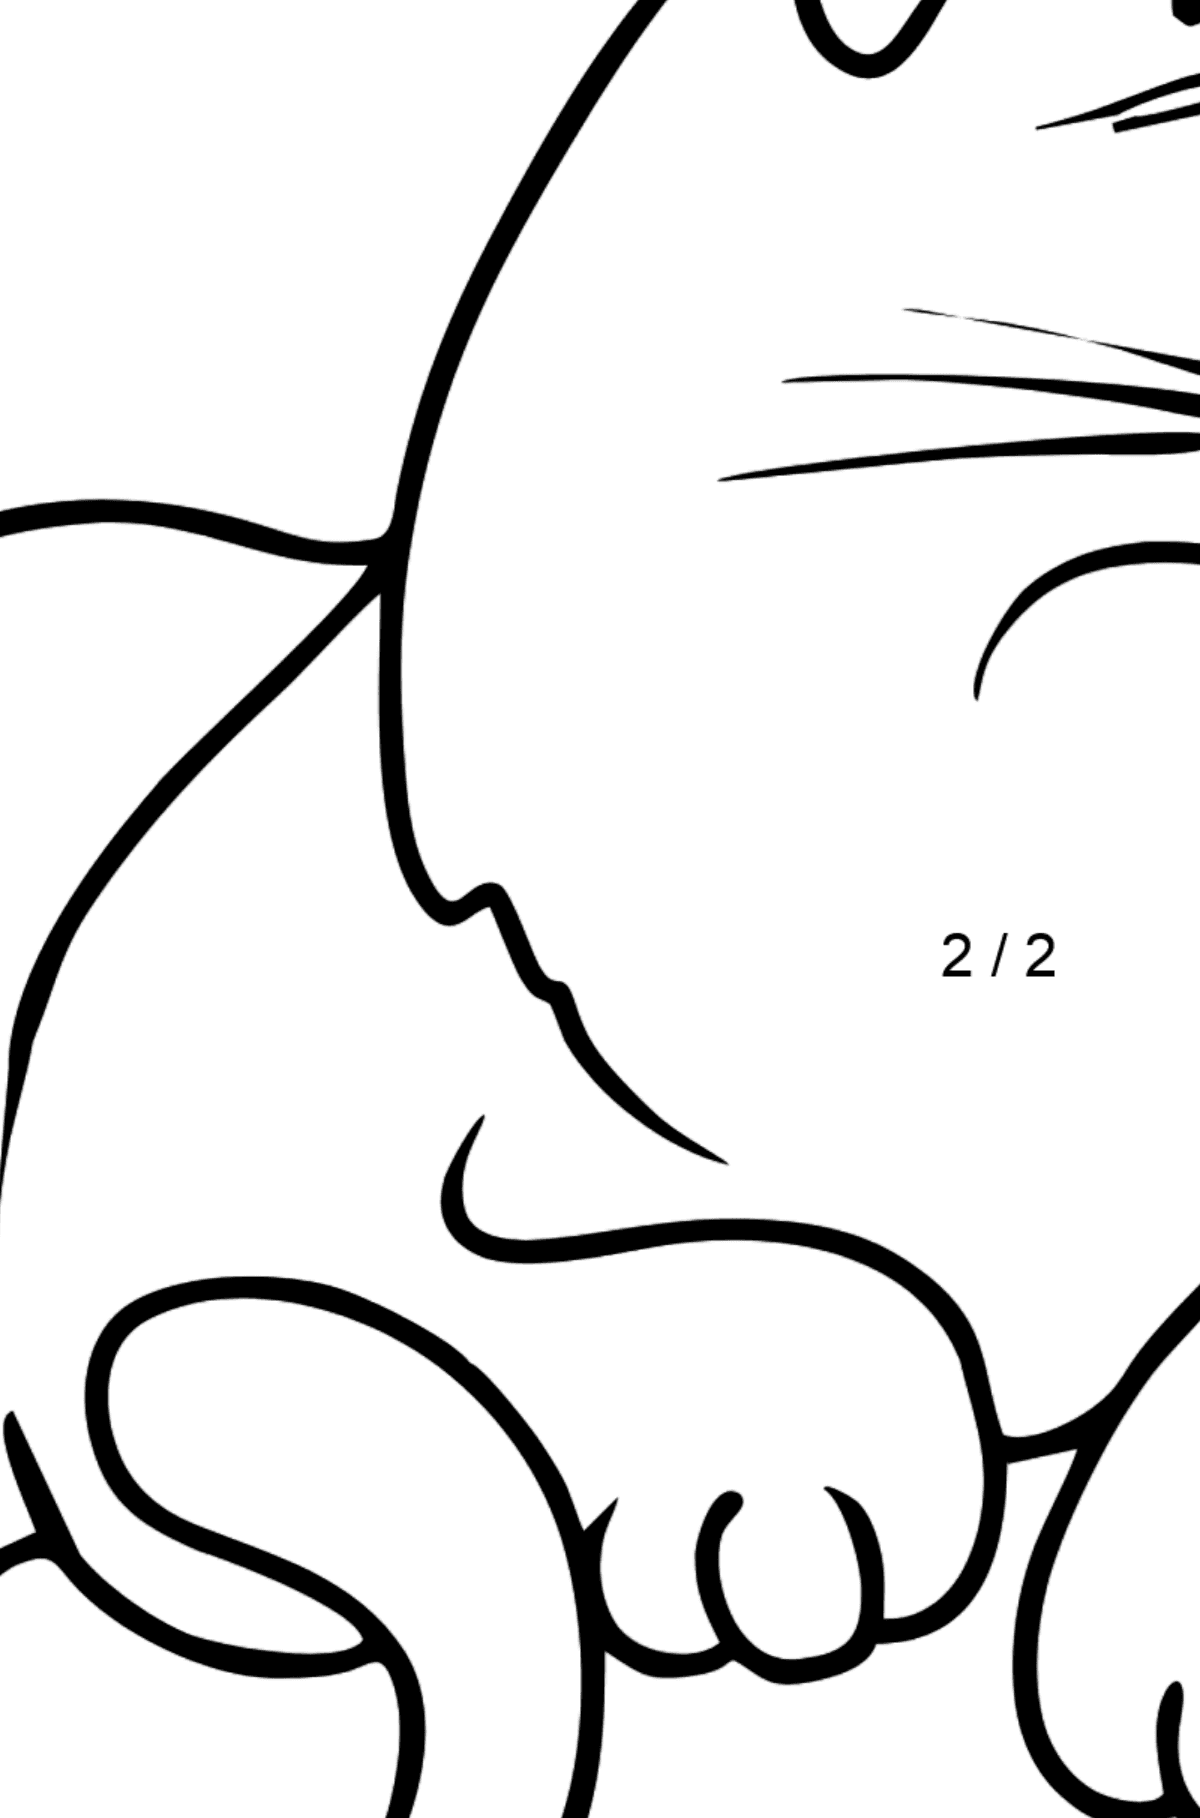 Panther coloring page - Math Coloring - Division for Kids